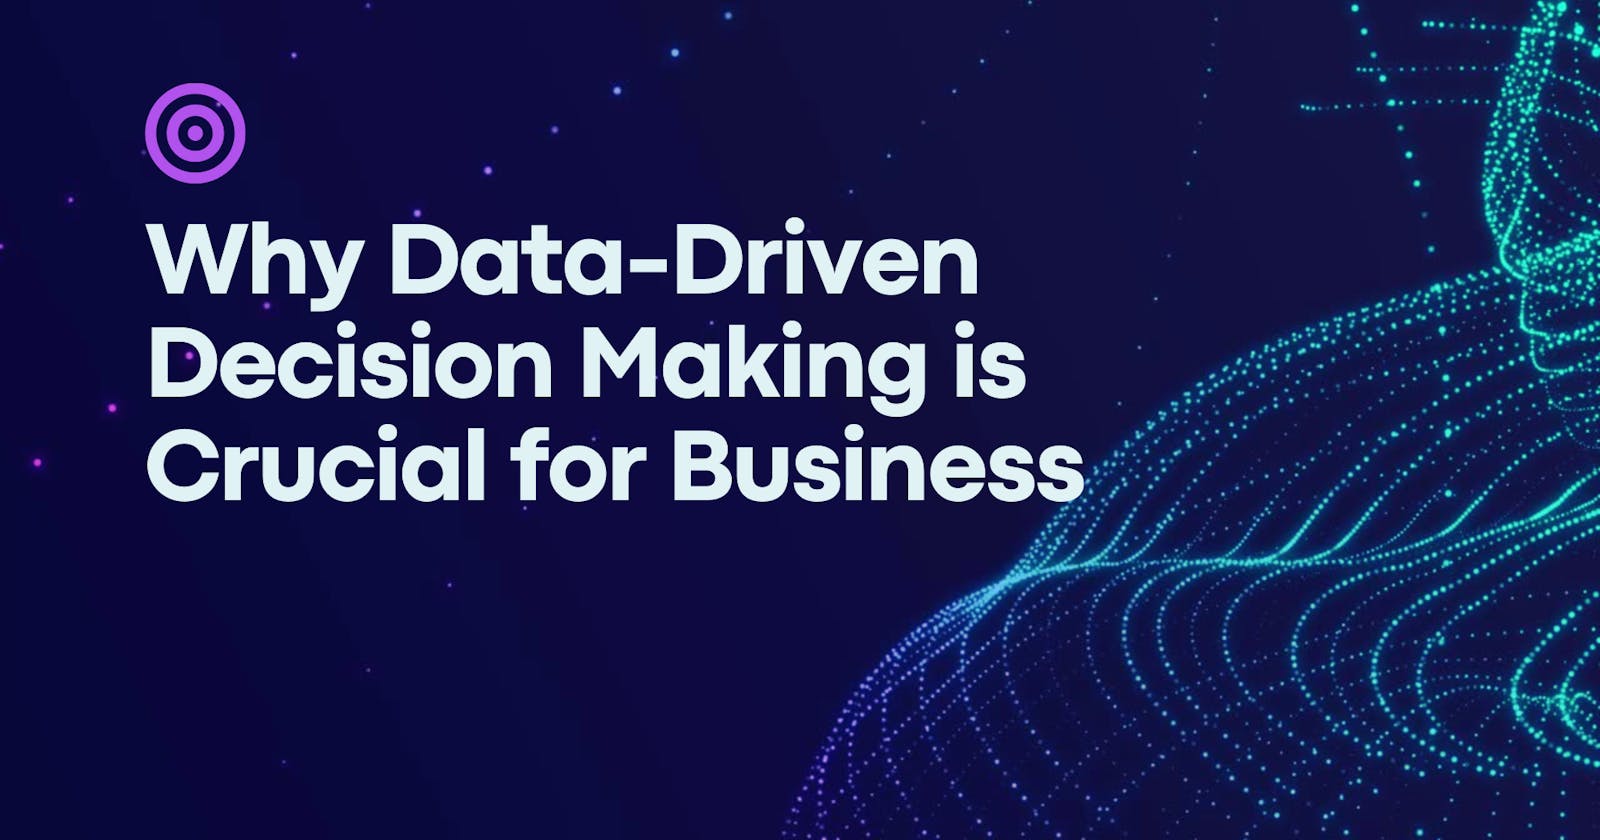 Why Data-Driven Decision Making is Crucial for Business